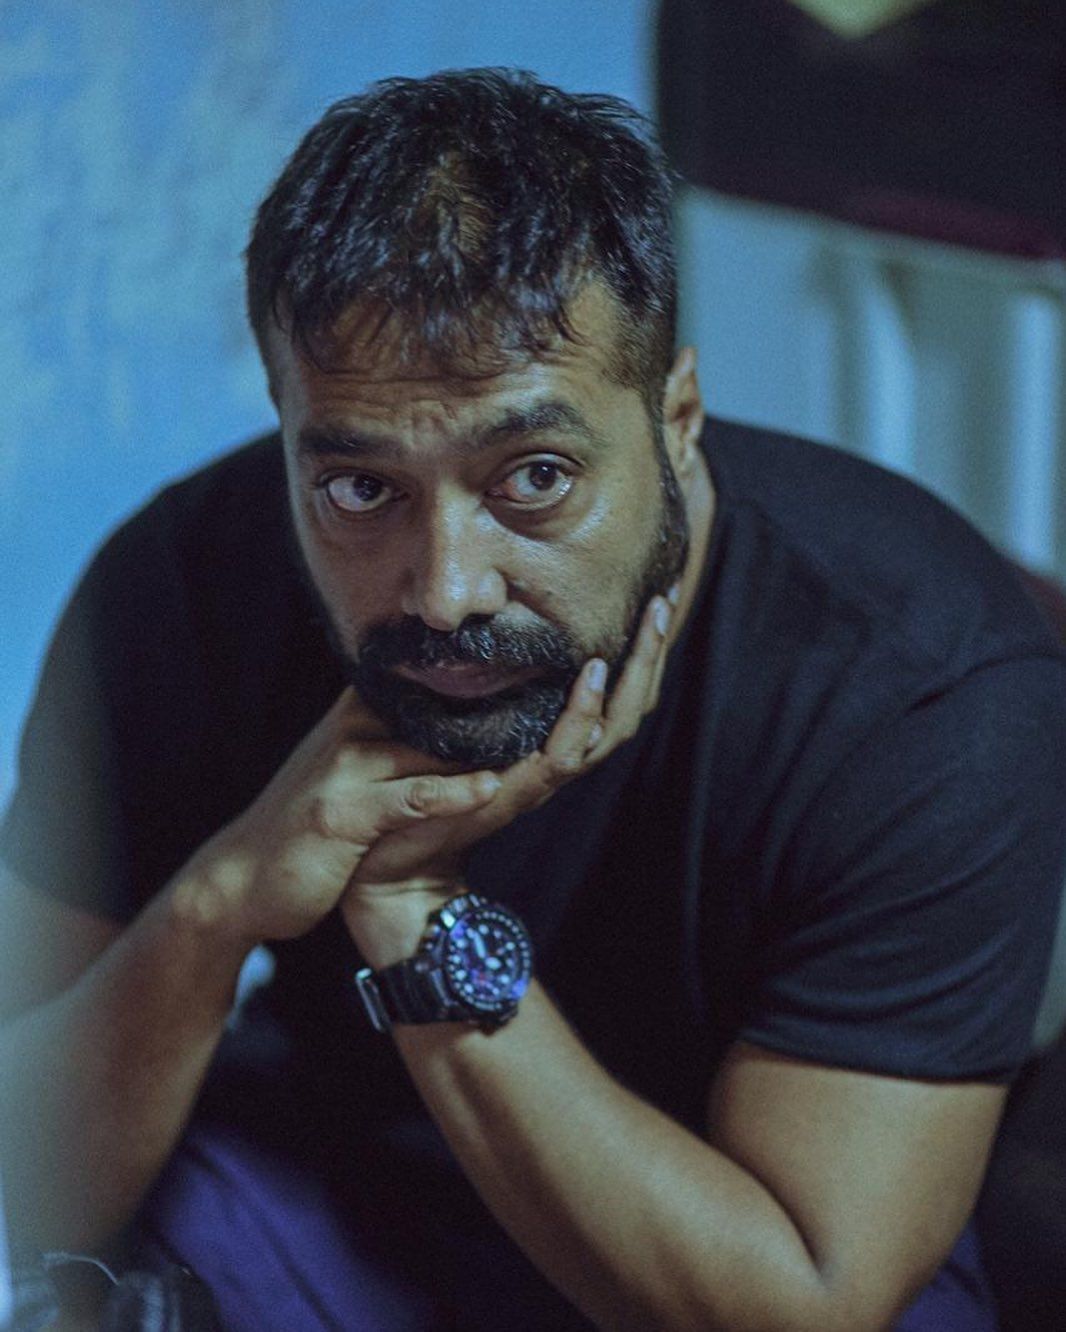 Anurag Kashyap's Team Of Lawyers Preparing To Drag Payal Ghosh To Court After Sexual Misconduct Allegations?